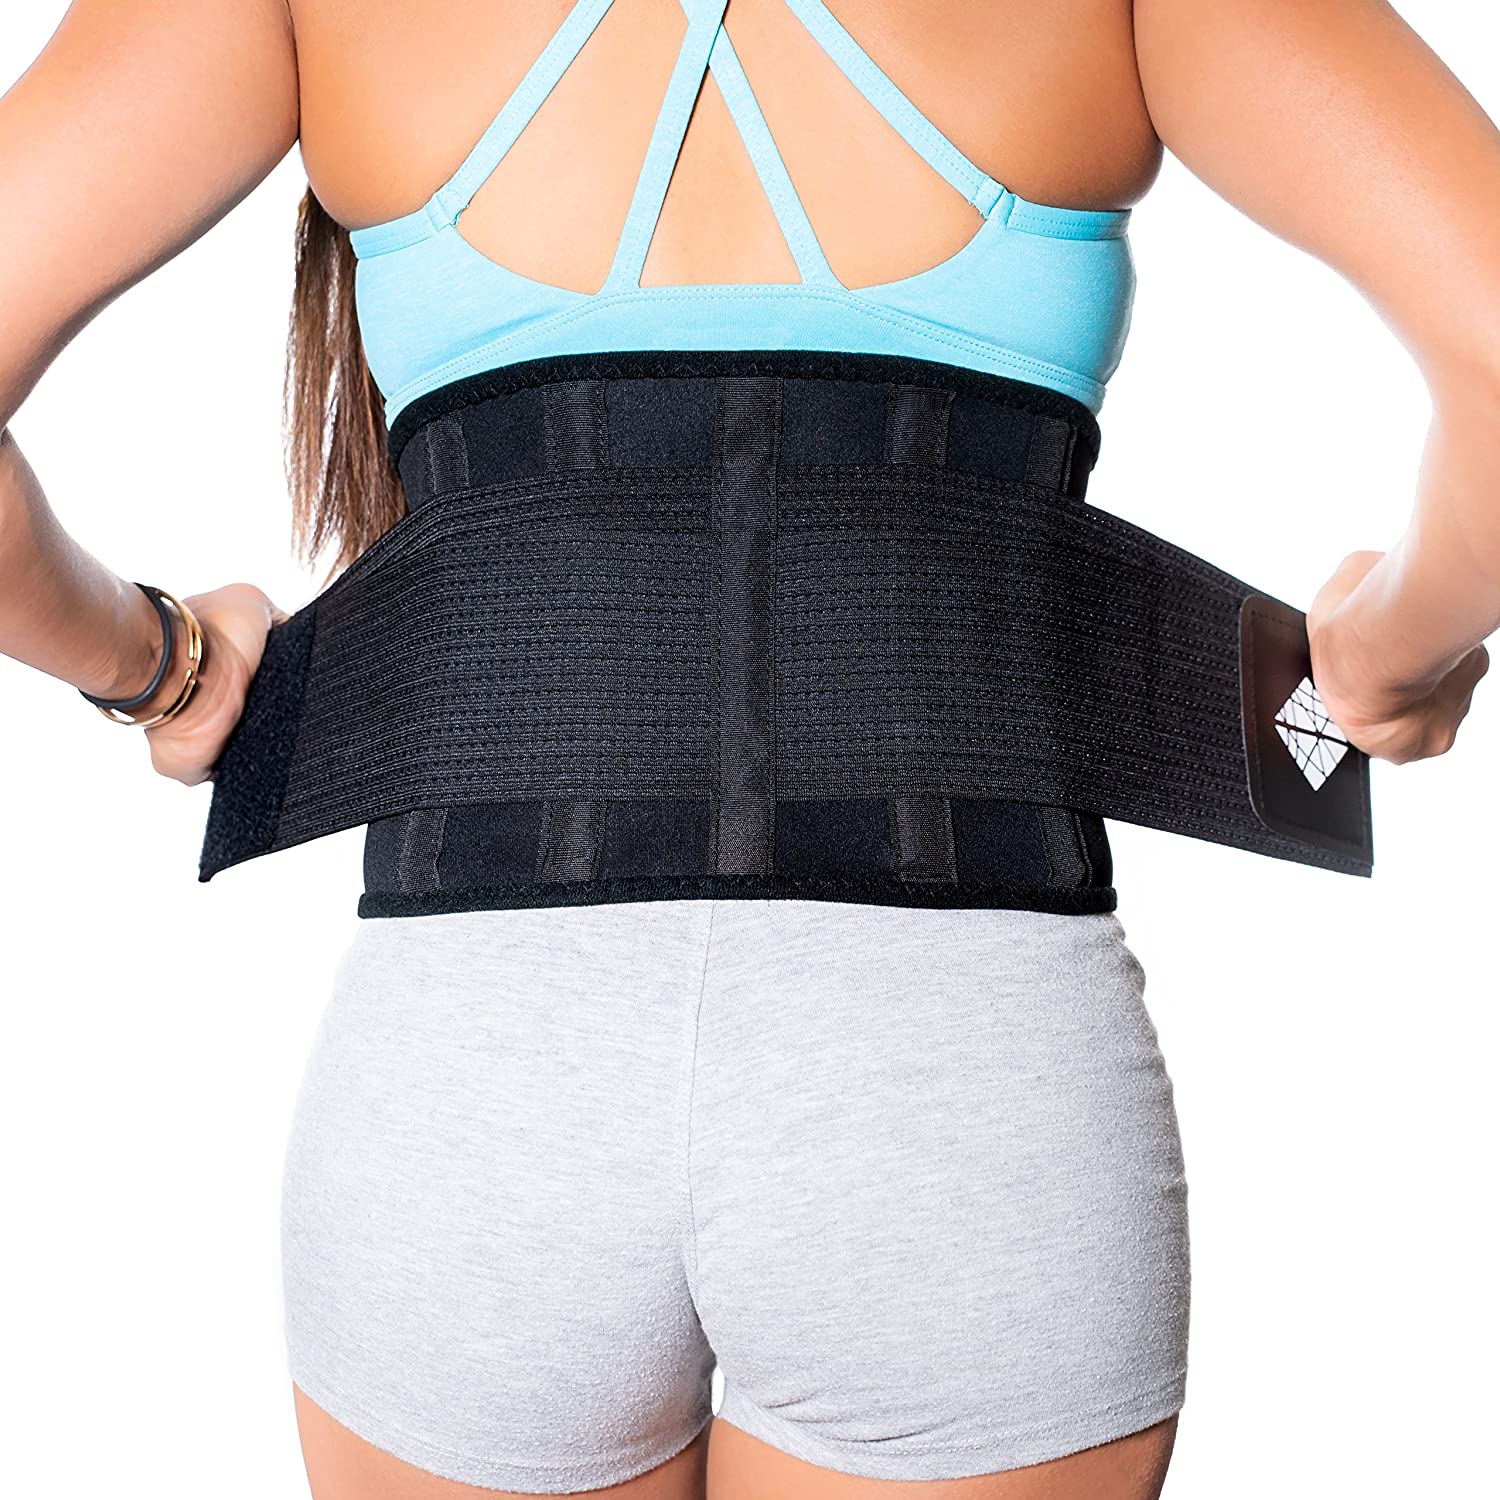 Lower Back Brace for Lumbar Support in PLUS SIZE